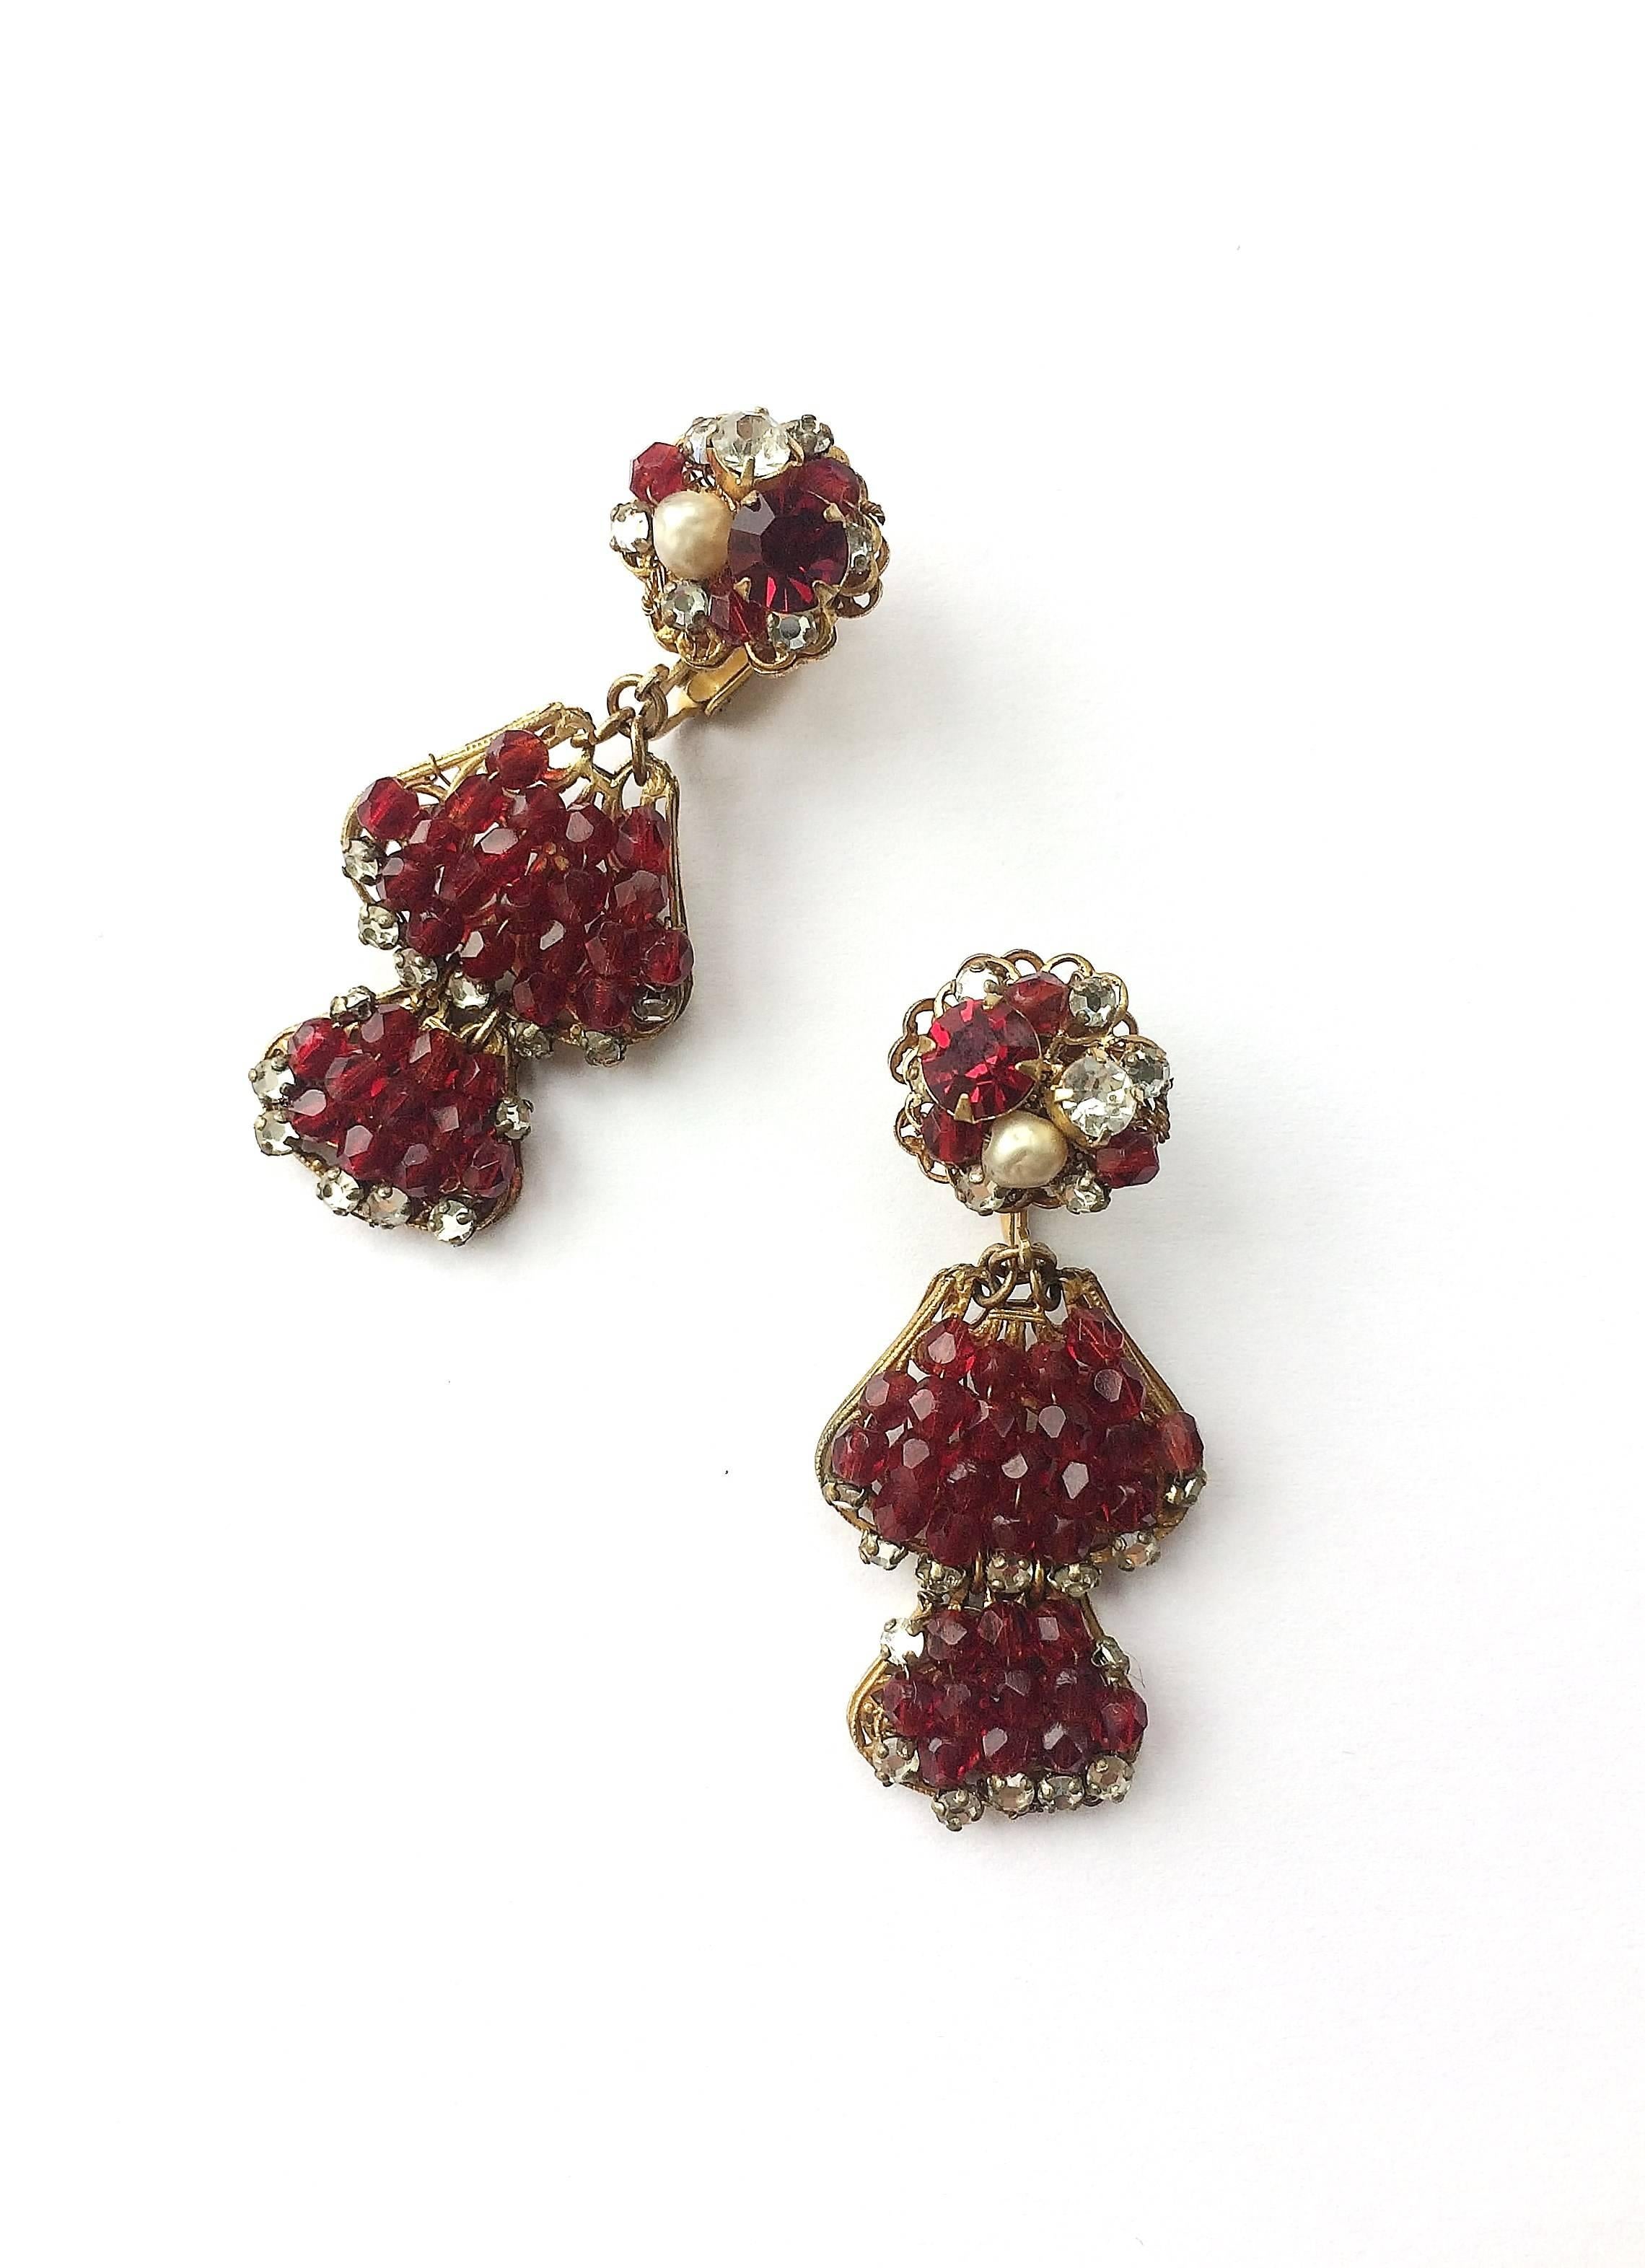 Ruby bead, rose montes and pearl drop earrings, De Mario, 1950s 1